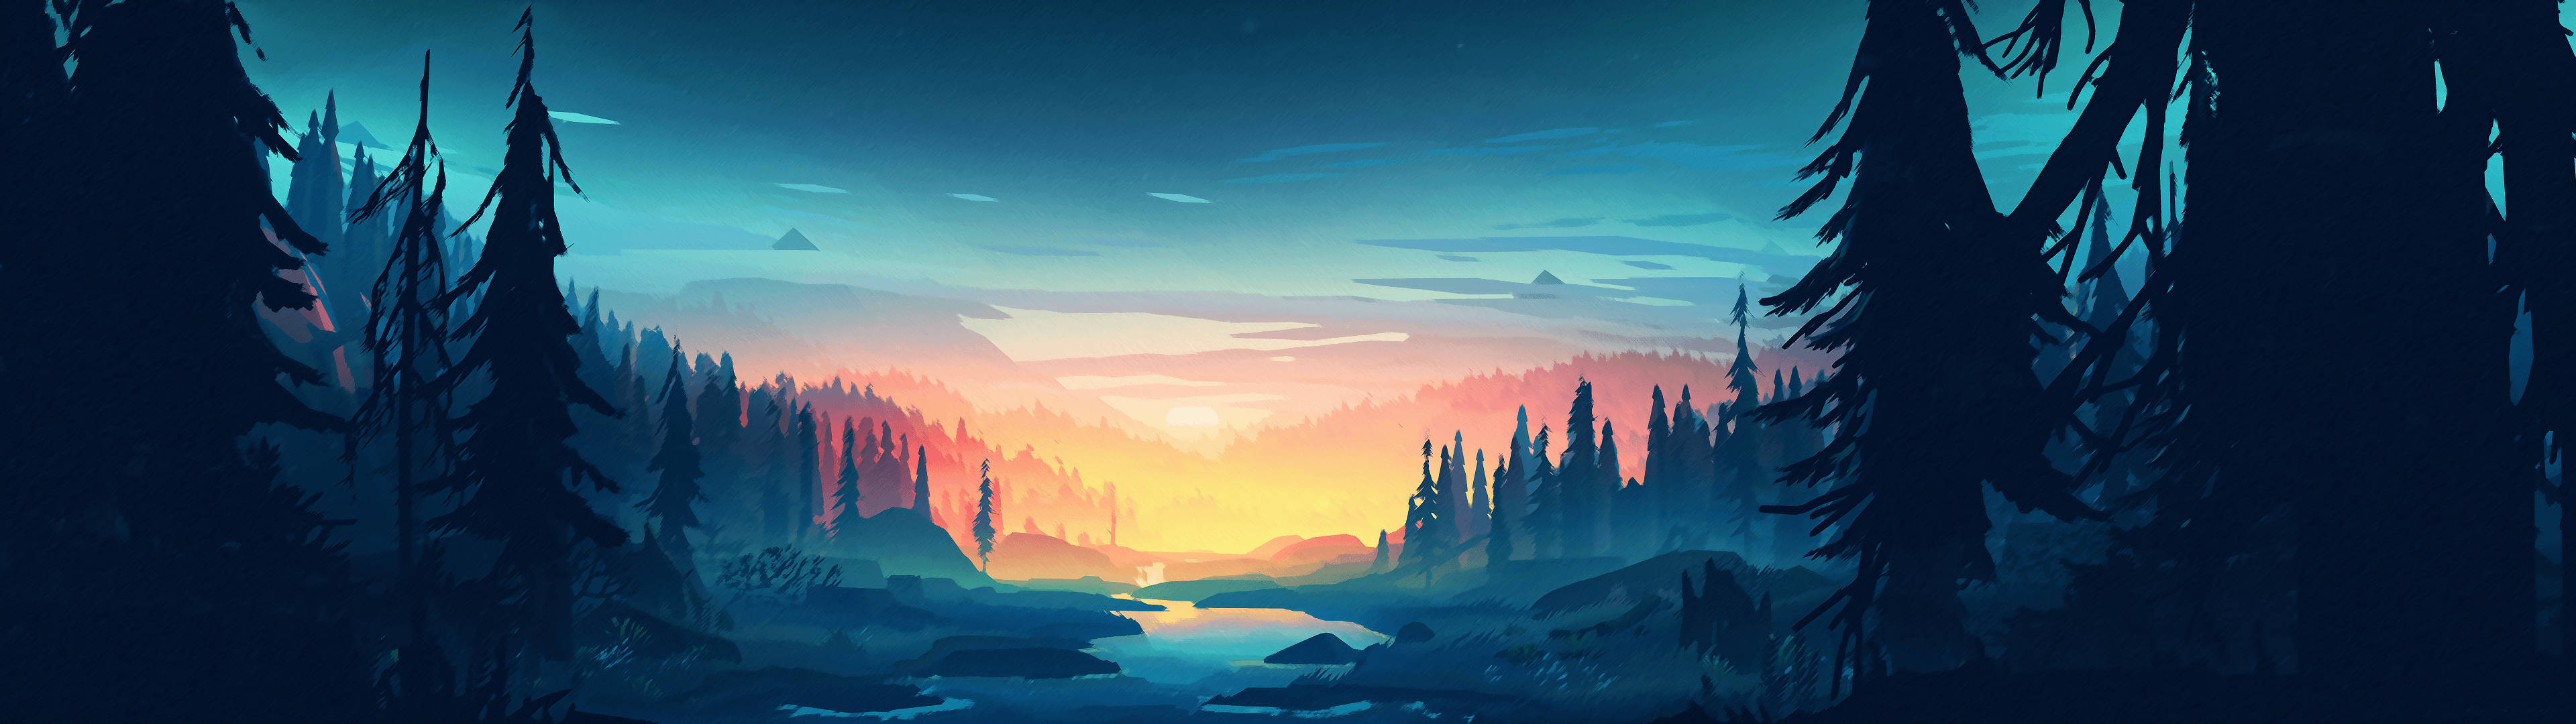 3840x1080 4k Sunrise In Forest Background